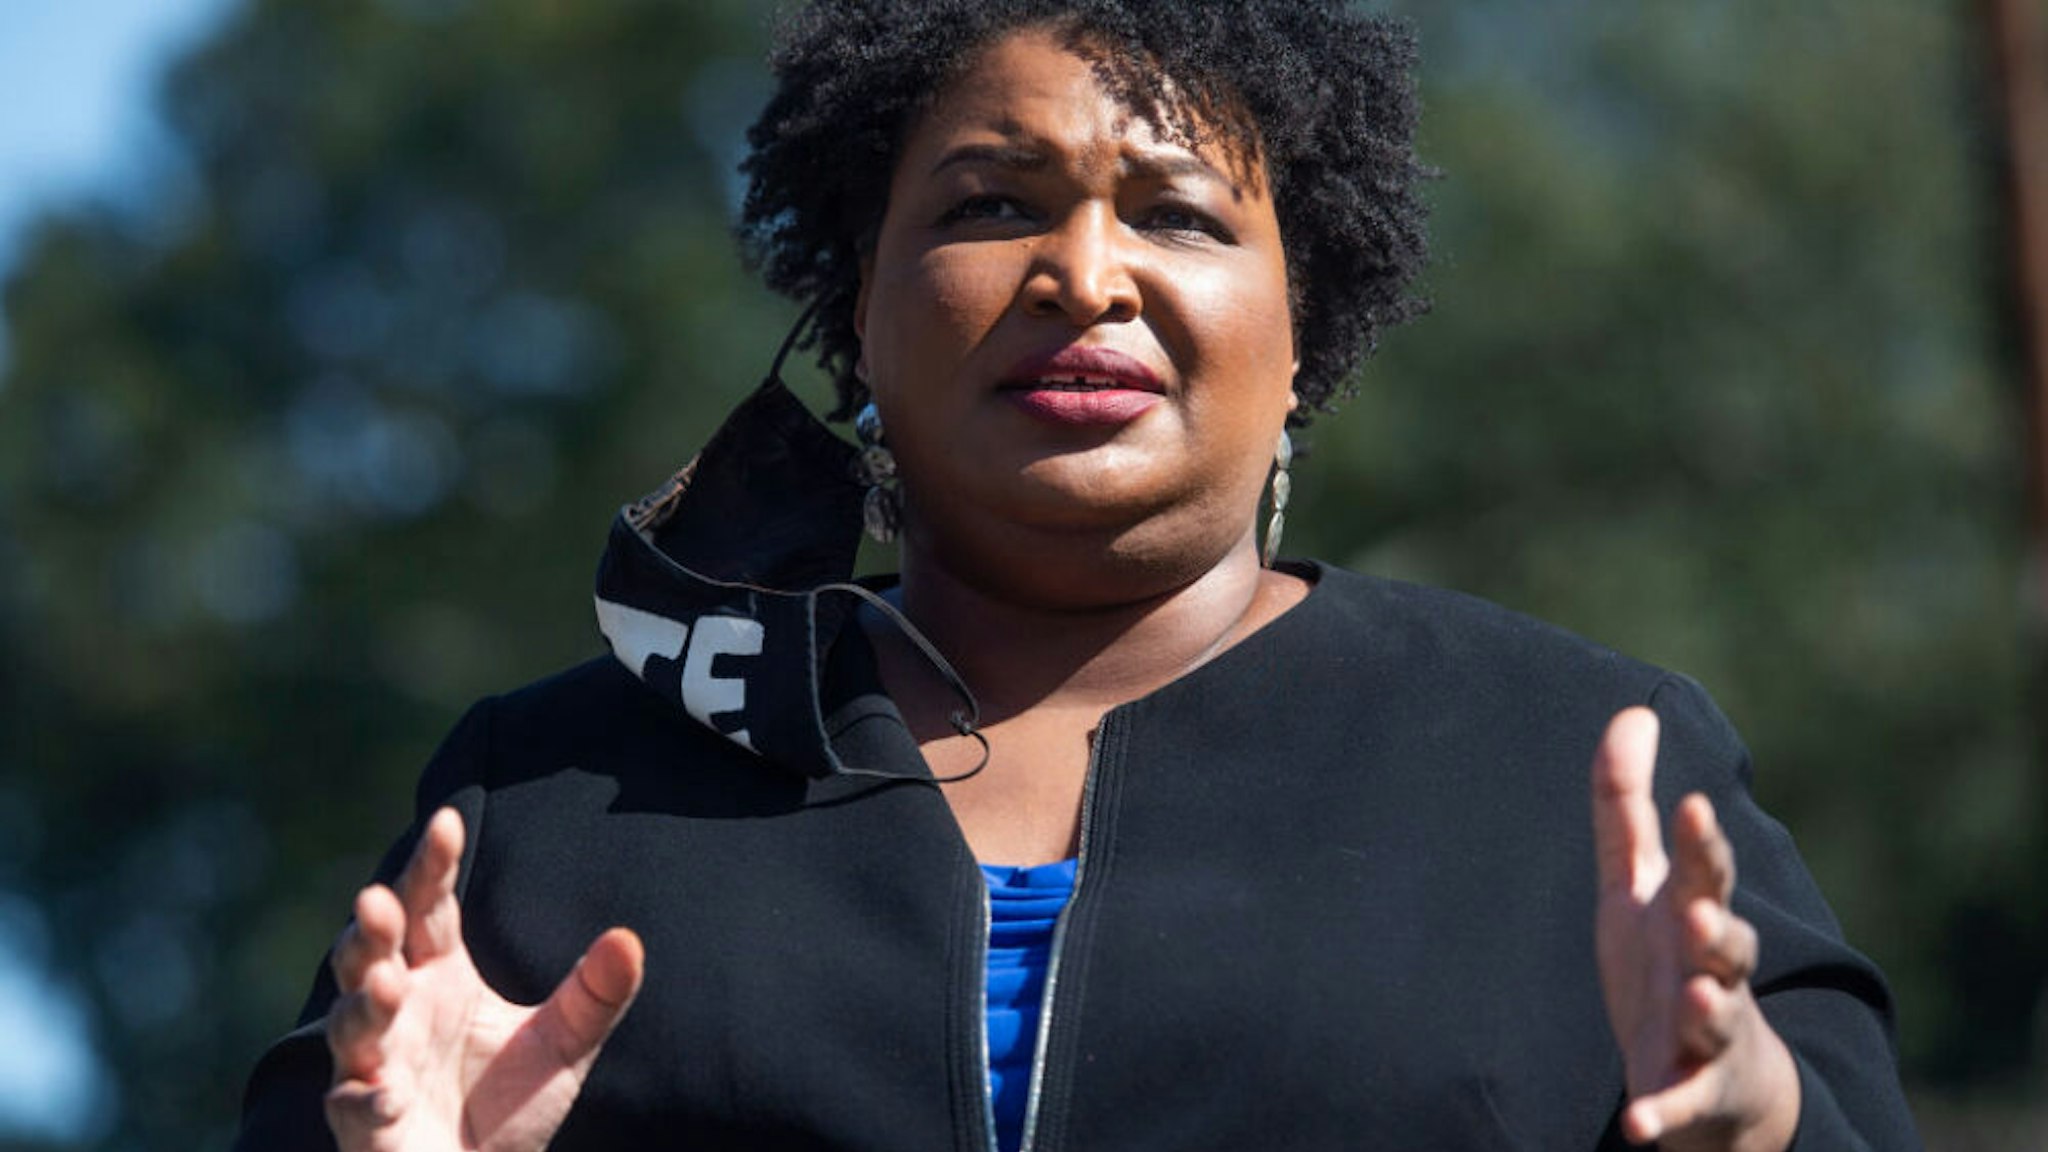 UNITED STATES - NOVEMBER 3: Stacey Abrams, former candidate for Georgia governor, speaks at campaign event for Rev. Raphael Warnock, Democratic candidate for Georgia senate, near Coan Park in Atlanta, Ga., on Tuesday, November 3, 2020.